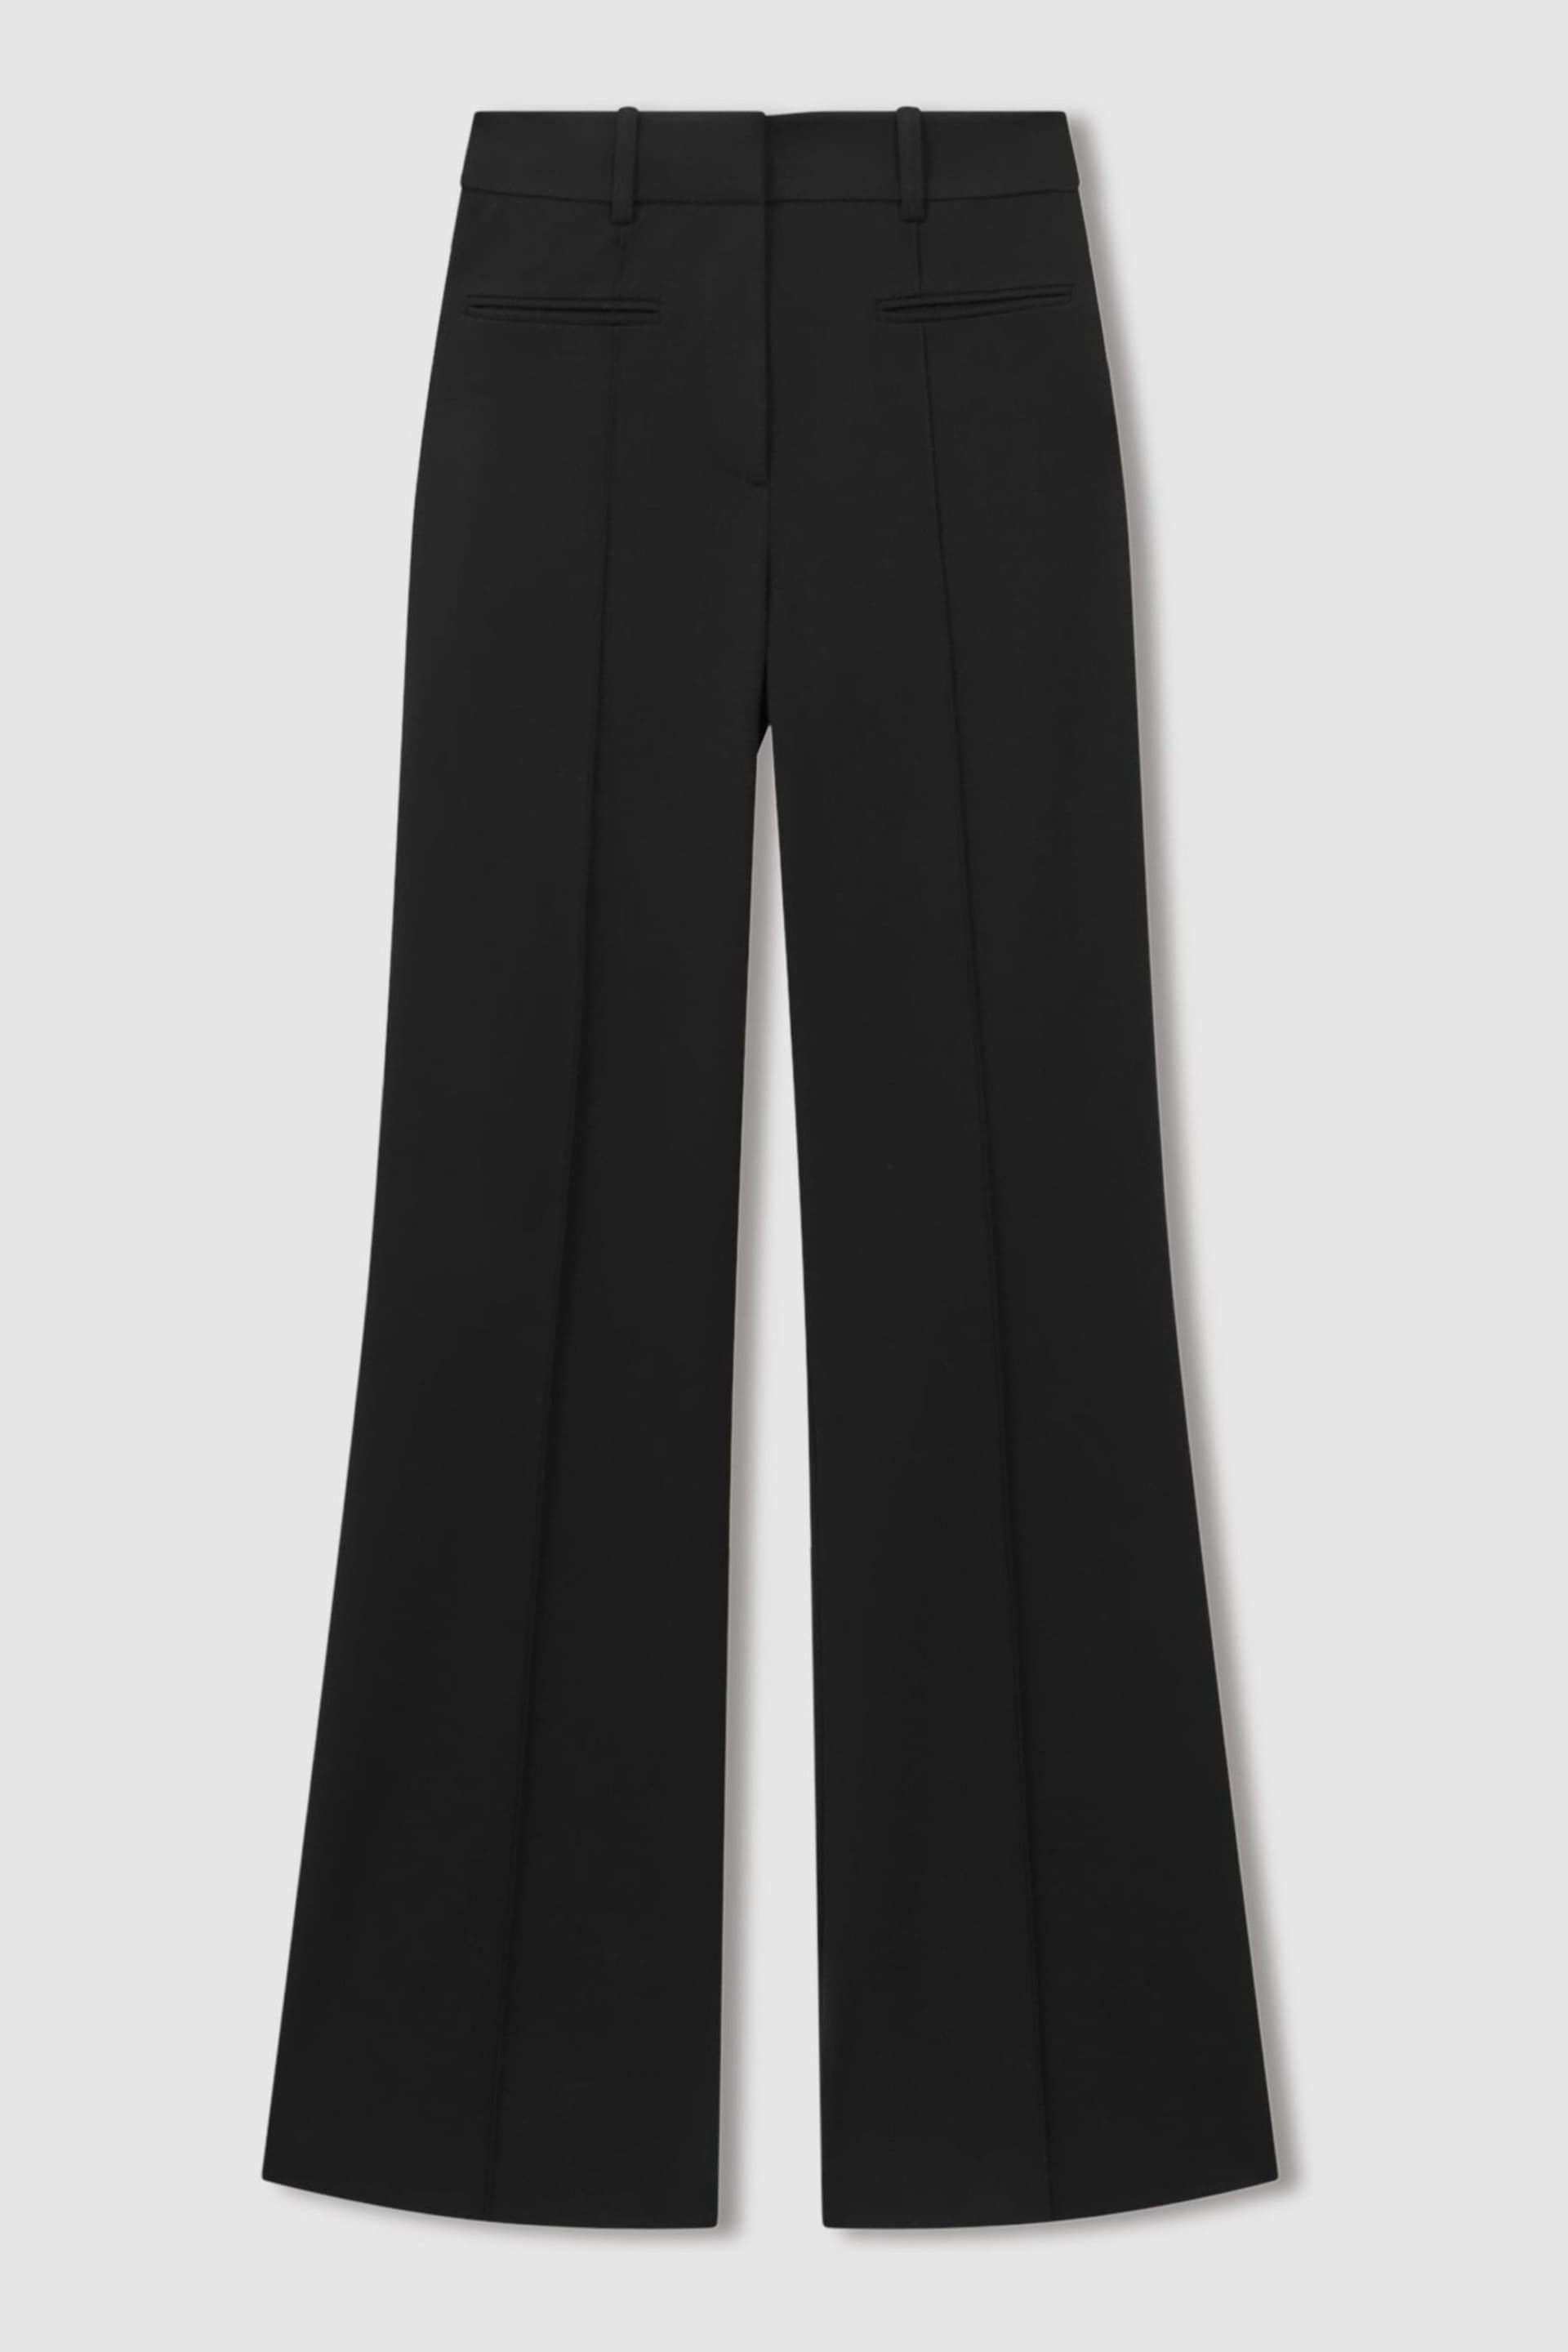 Reiss Black Claude Petite High Rise Flared Trousers - Image 2 of 6